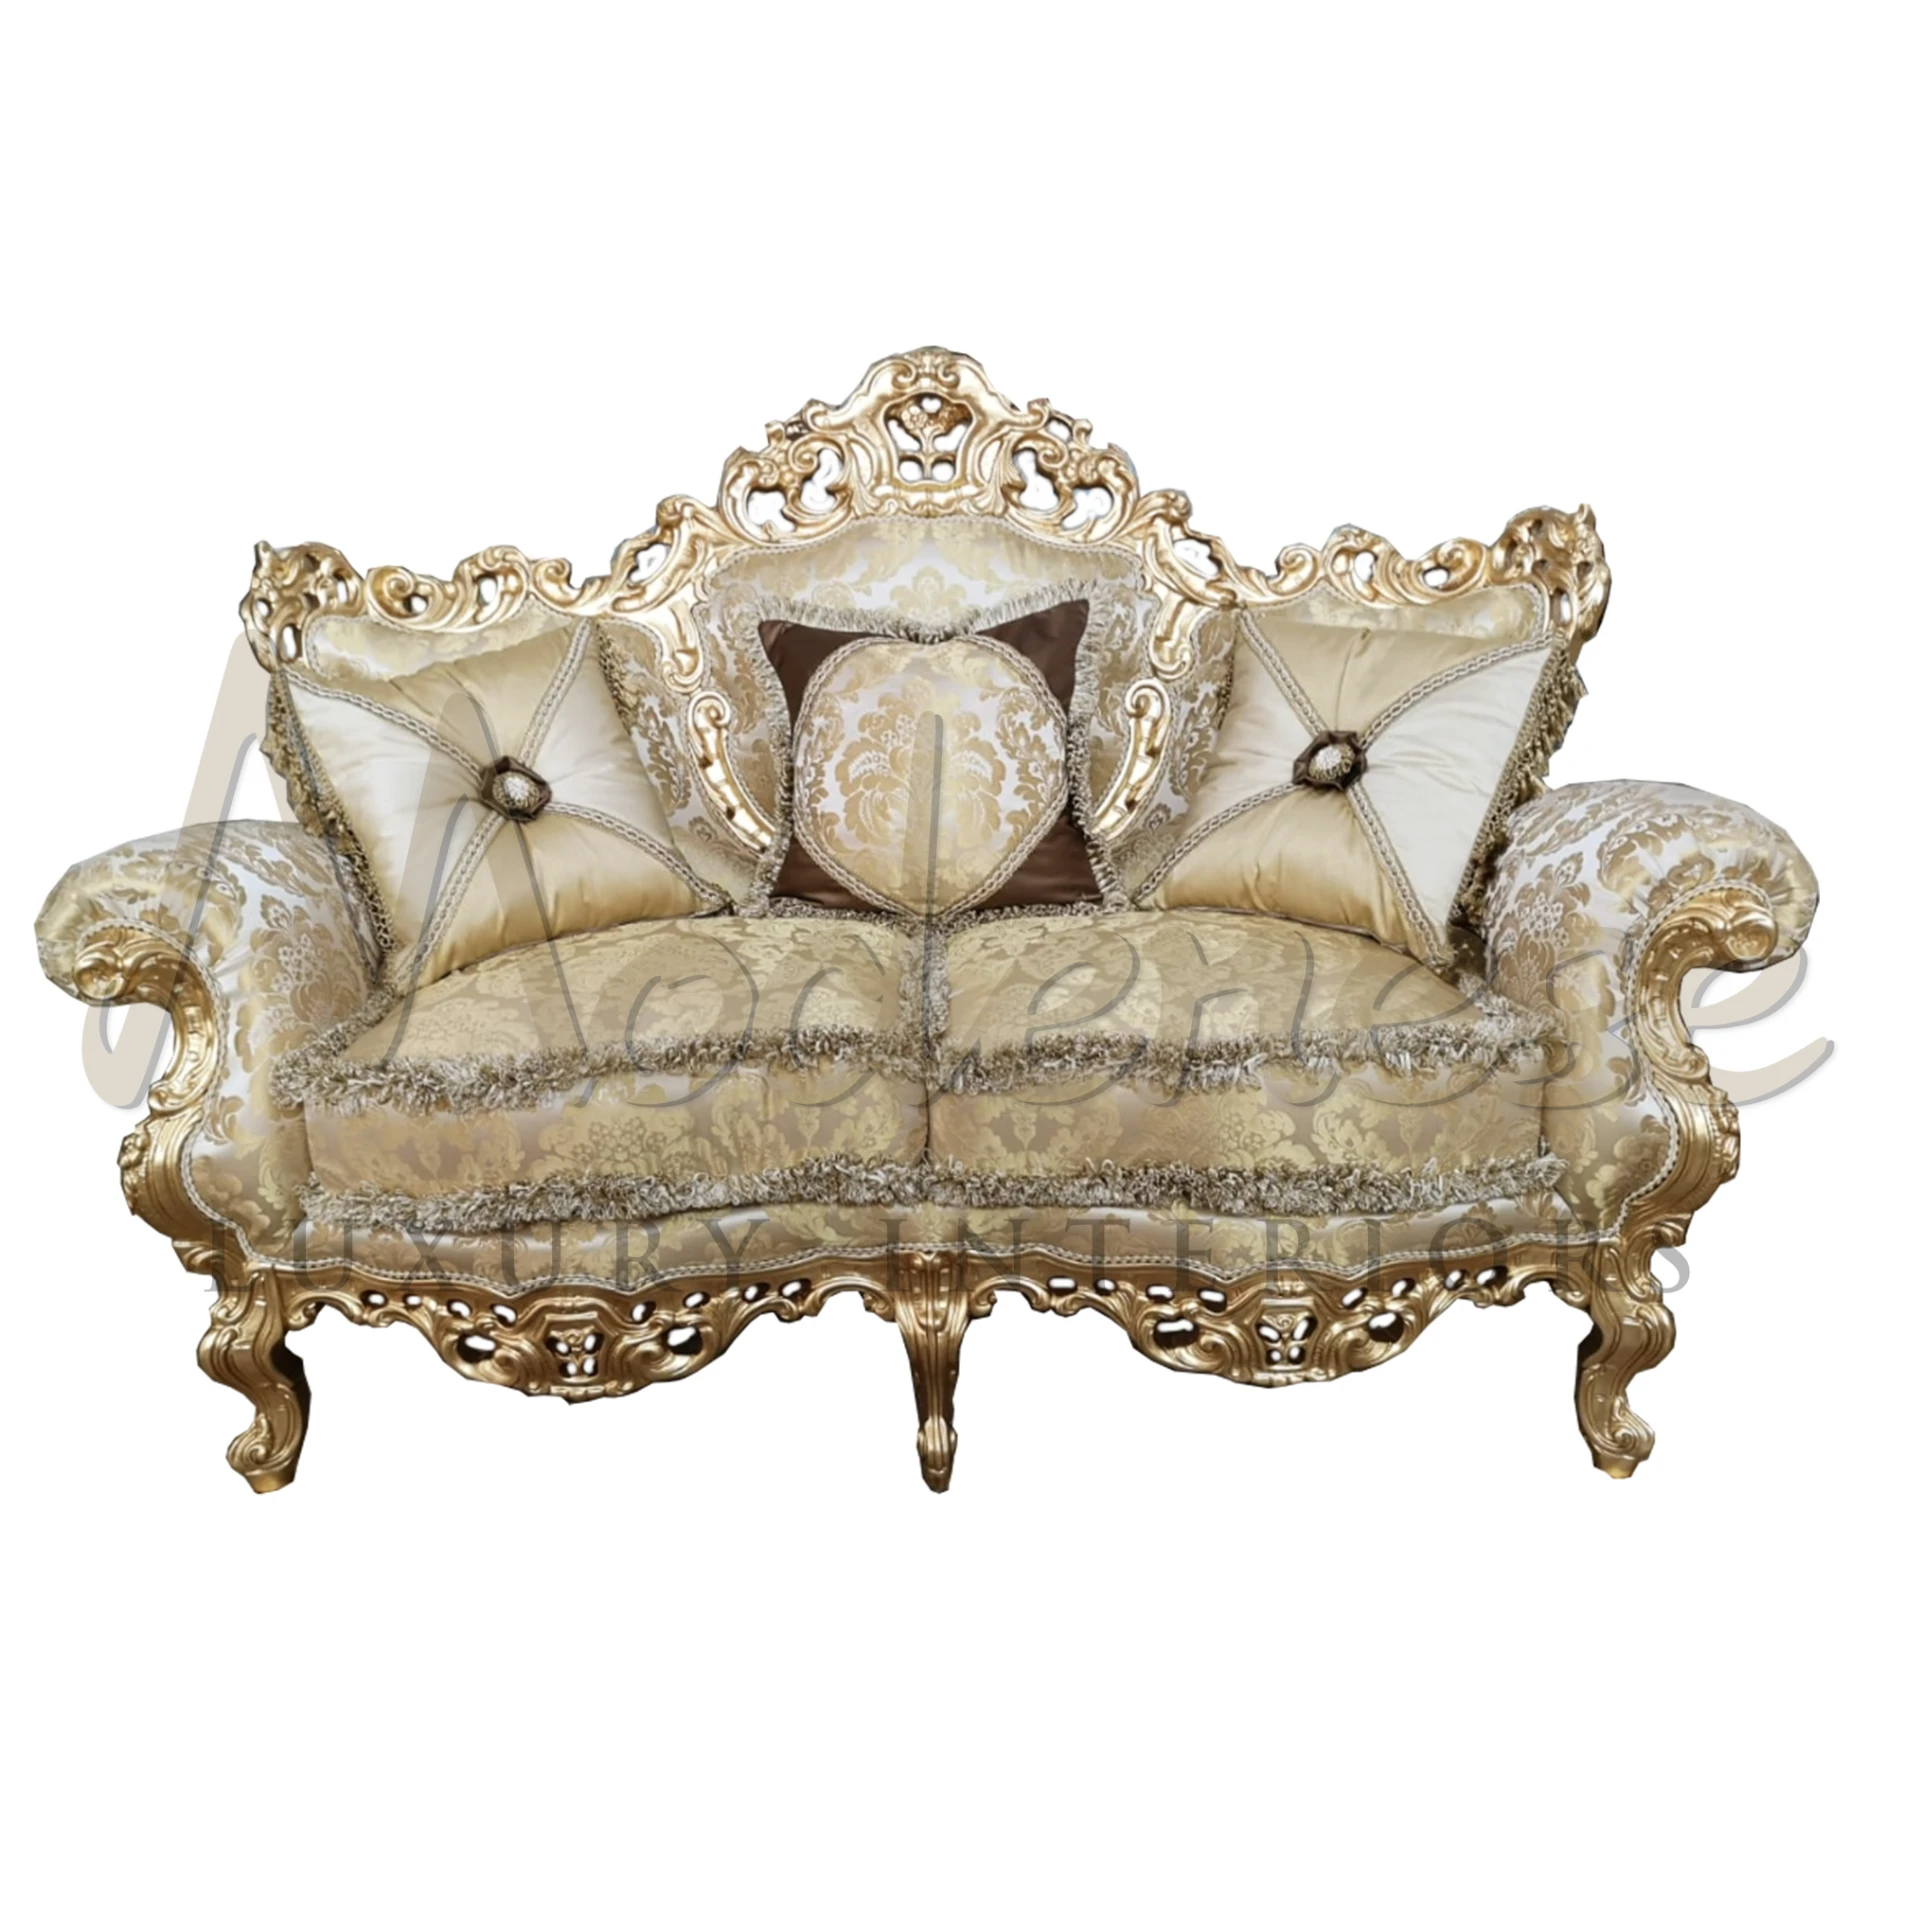 Baroque Sofa with gold leaf decorations and sumptuous hand carving, showcasing classic European elegance and luxury interior design.